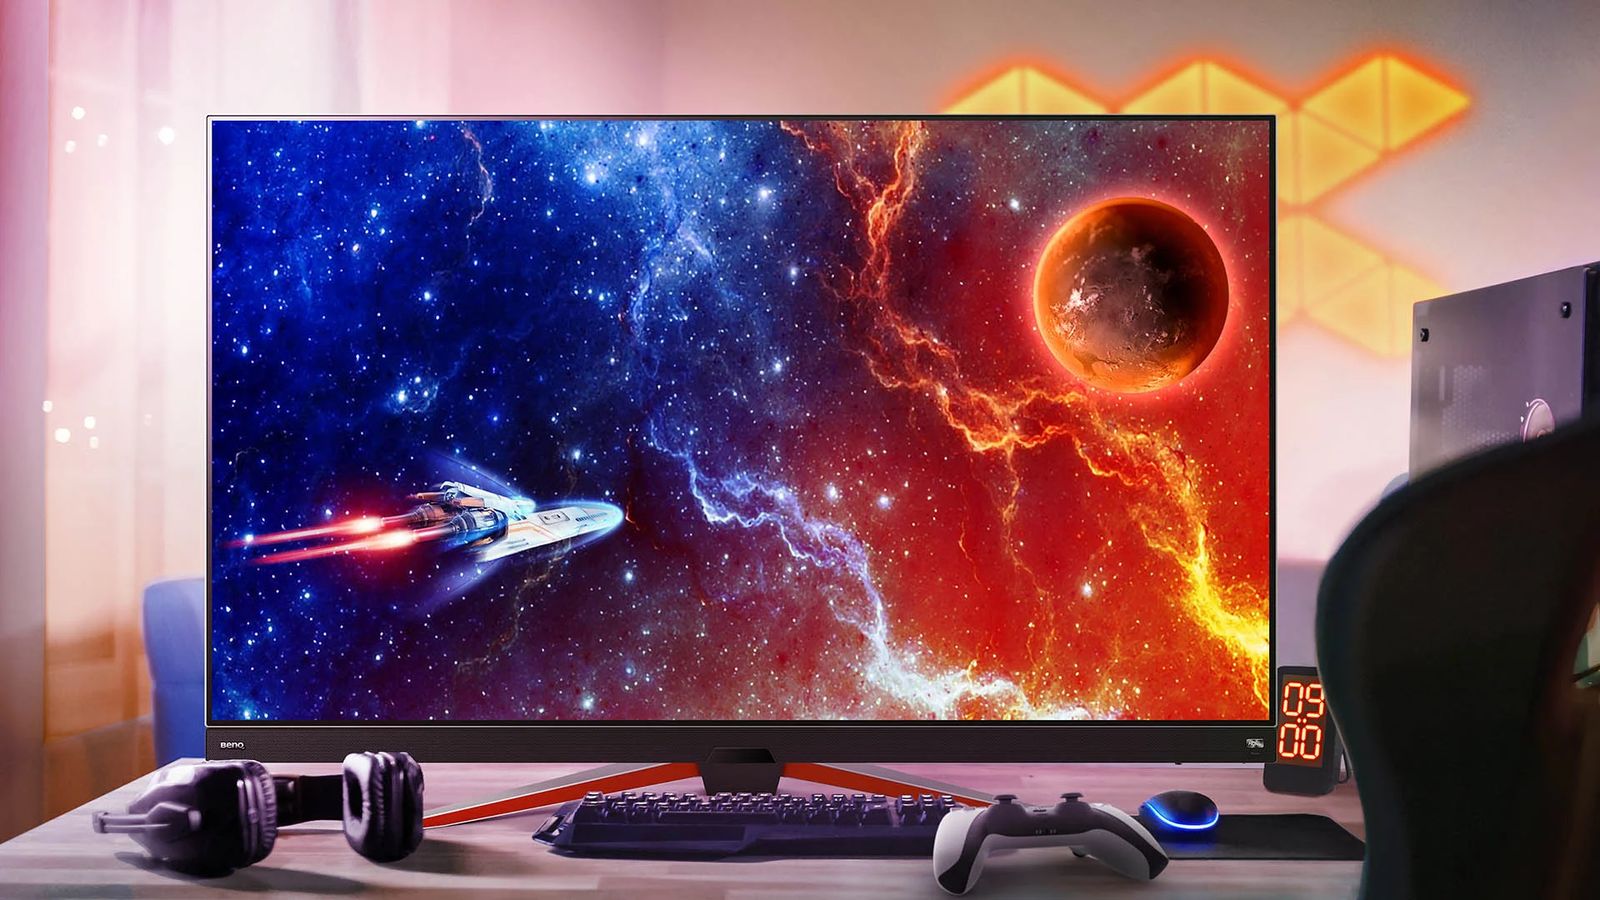 A black OLED monitor with a space scene on the display sat on a desk with a keyboard, headset, controller. and mouse.